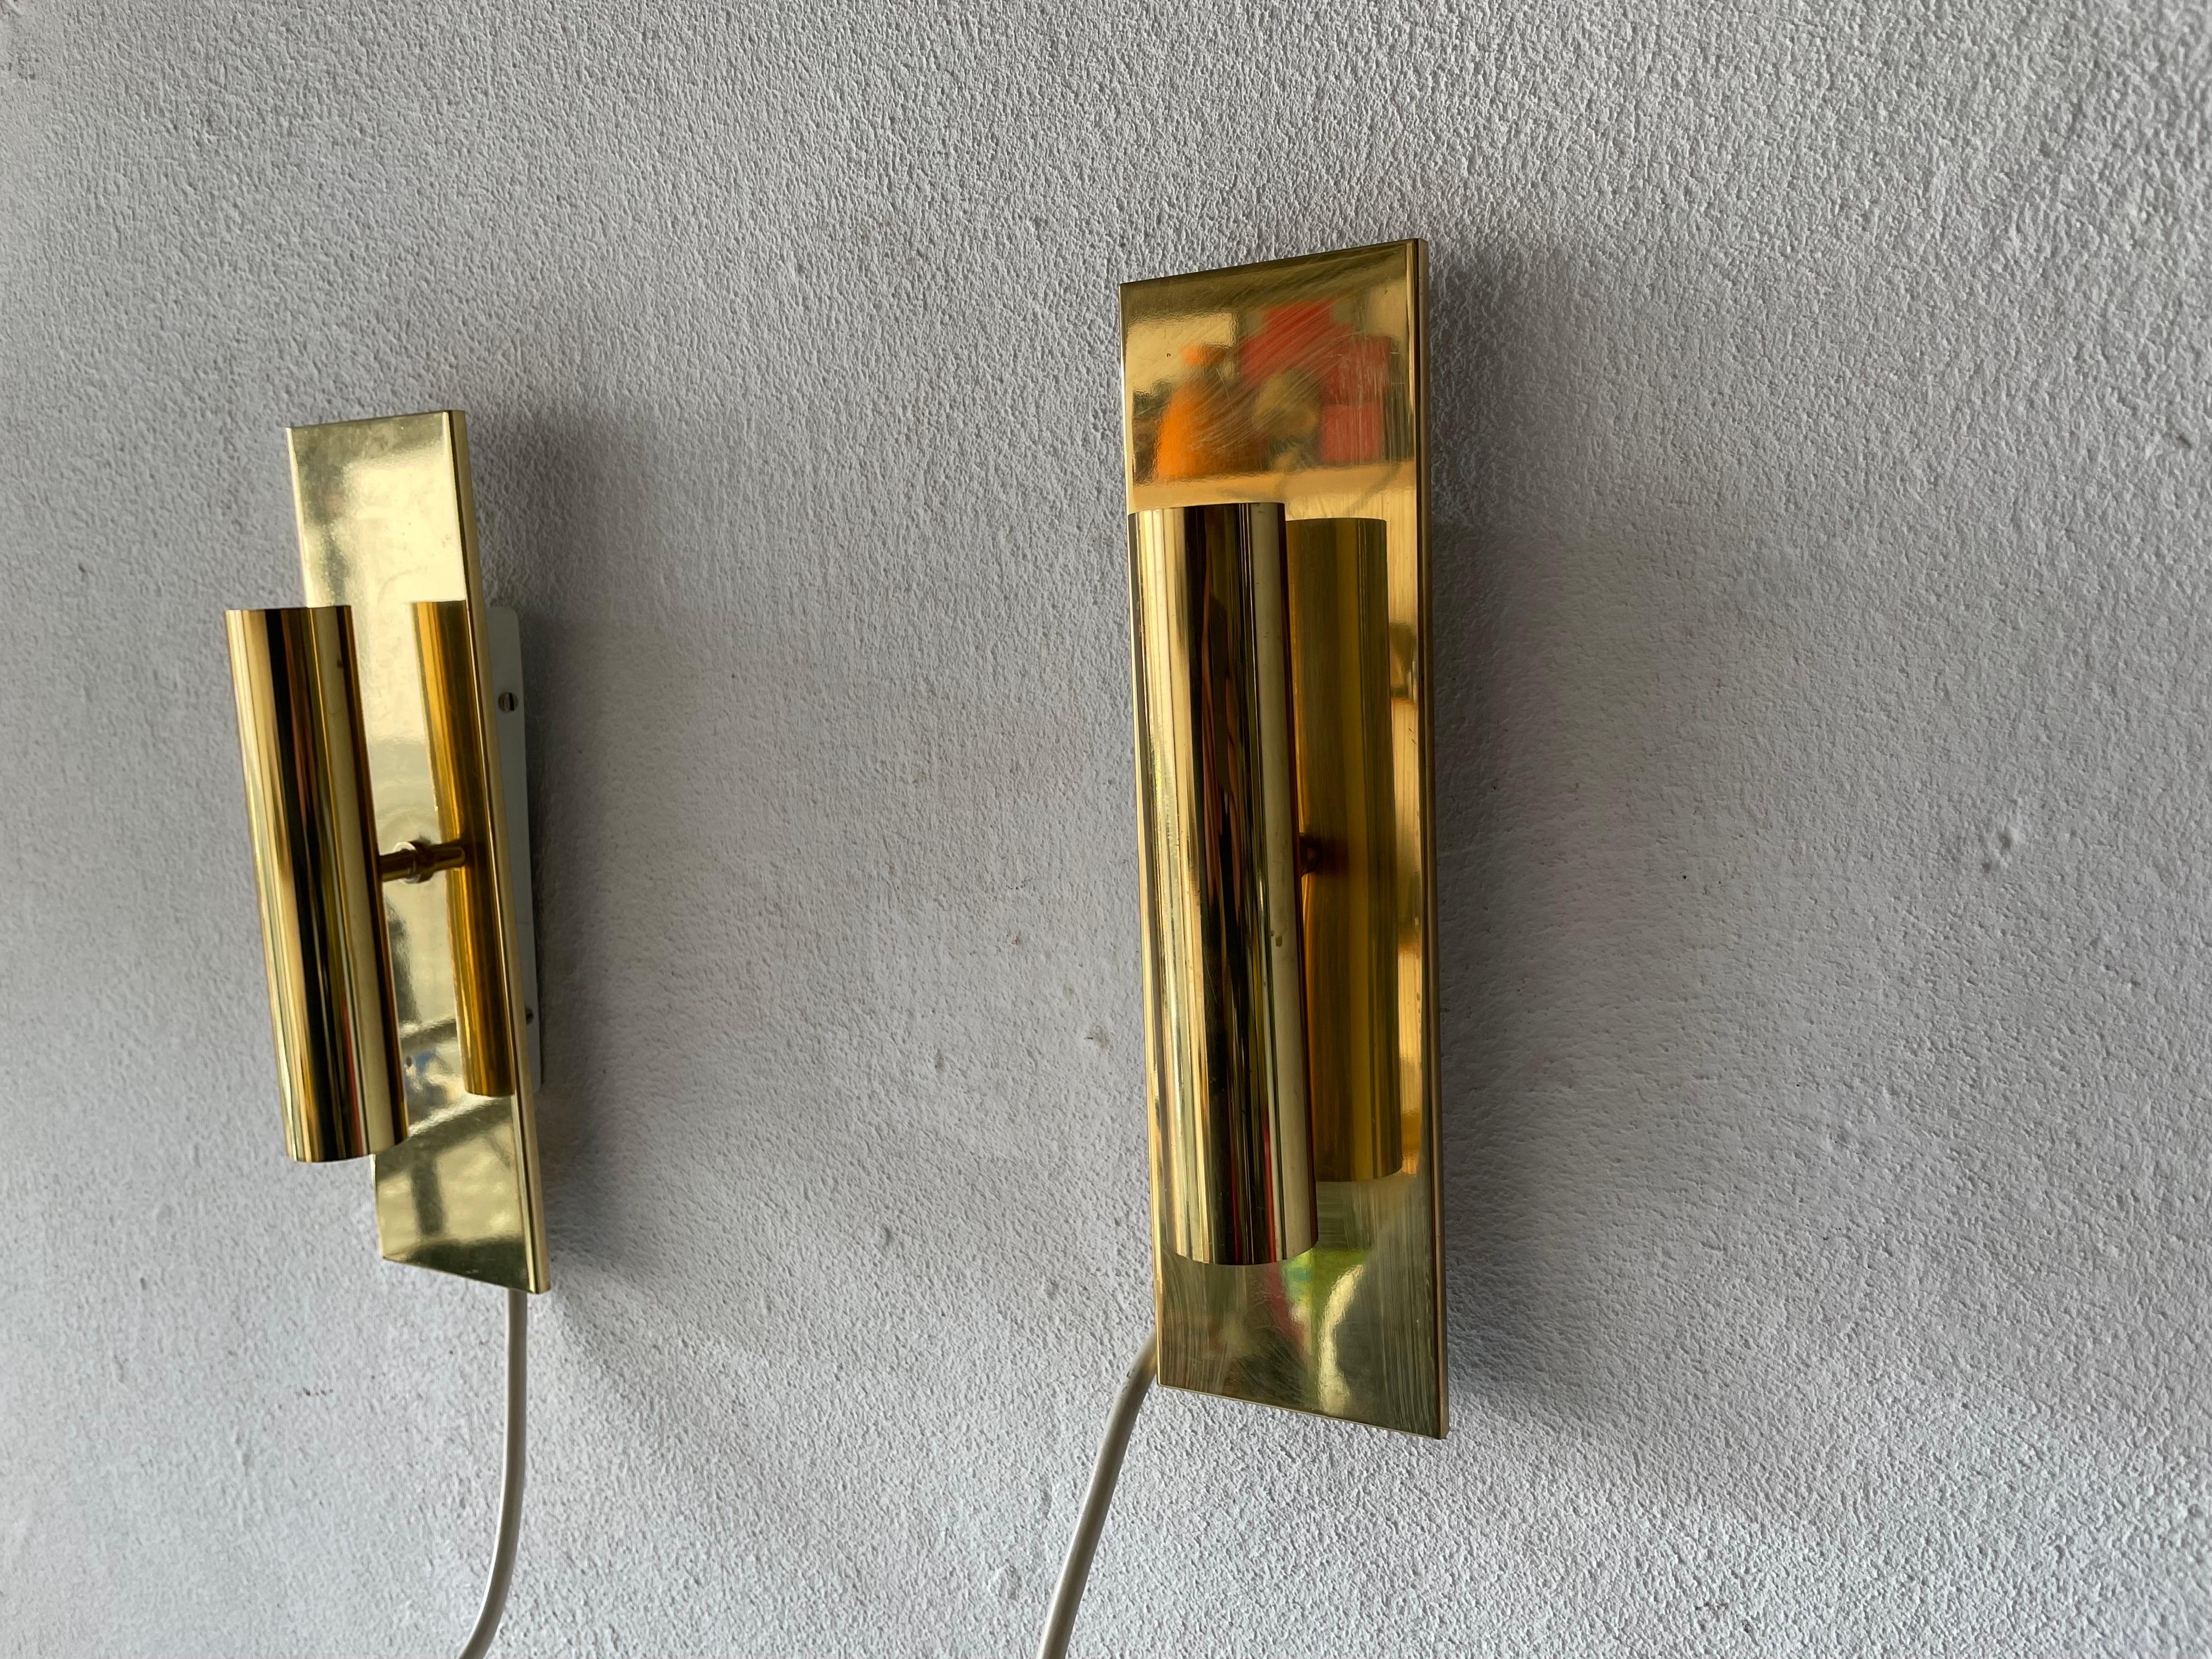 Minimalist 2-Side Brass Pair of Sconces by Doria, 1960s, Germany

Very elegant and Minimalist wall lamps
Lamp is in very good condition.

These lamps works with 2xE14 standard light bulbs. 
Wired and suitable to use in all countries. (110-220